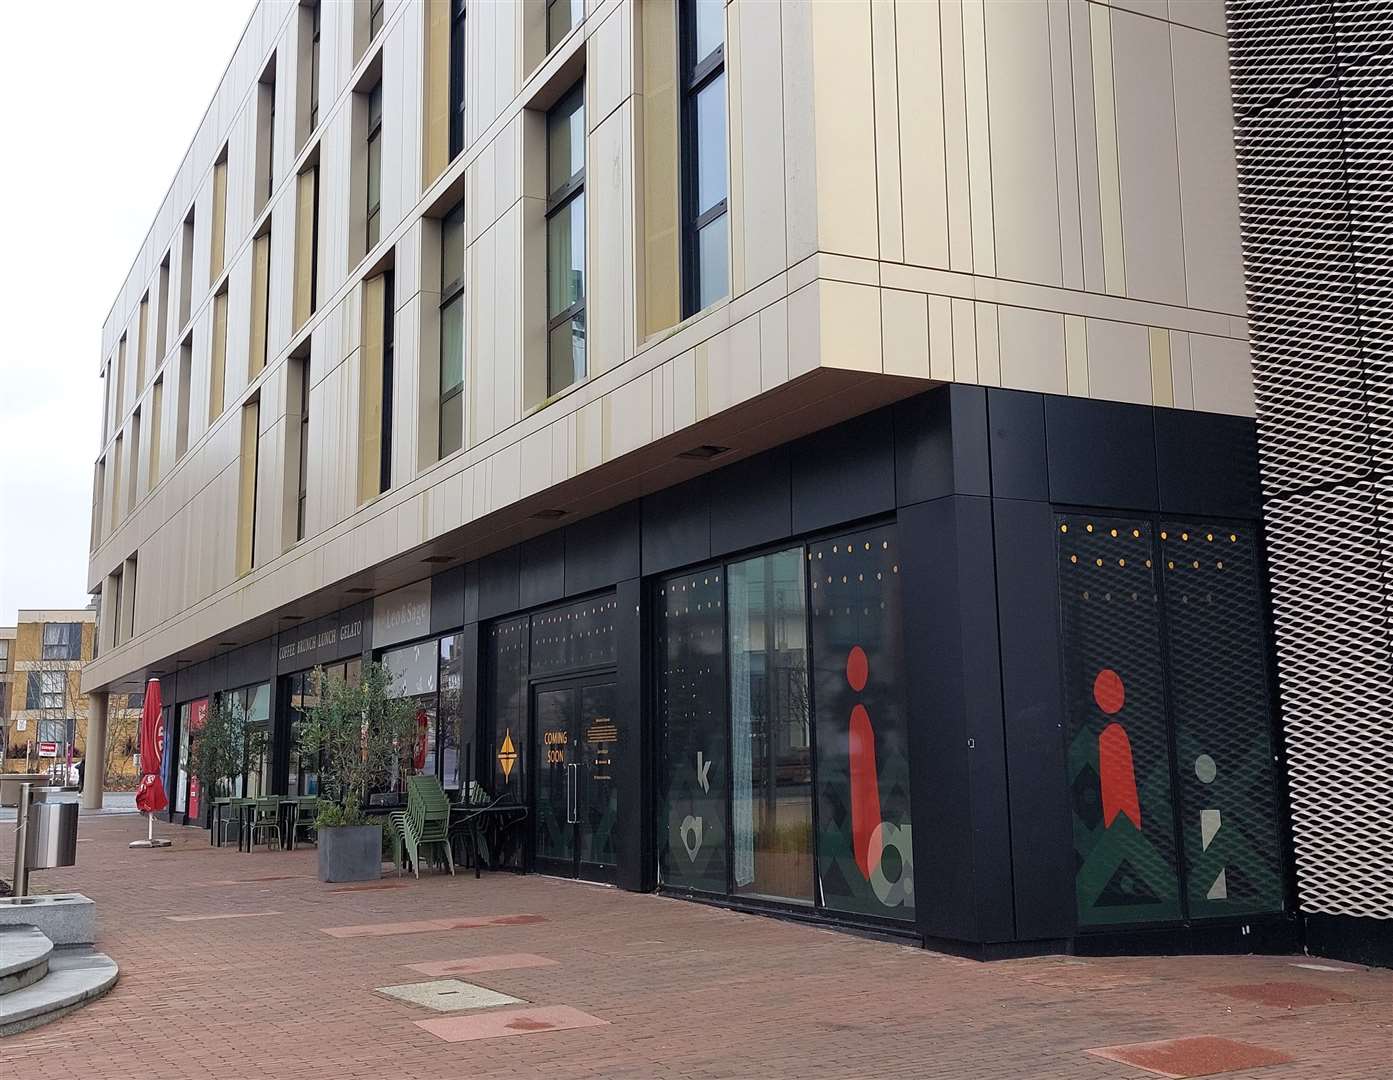 Plans to open a nightclub under Travelodge at Elwick Place were withdrawn